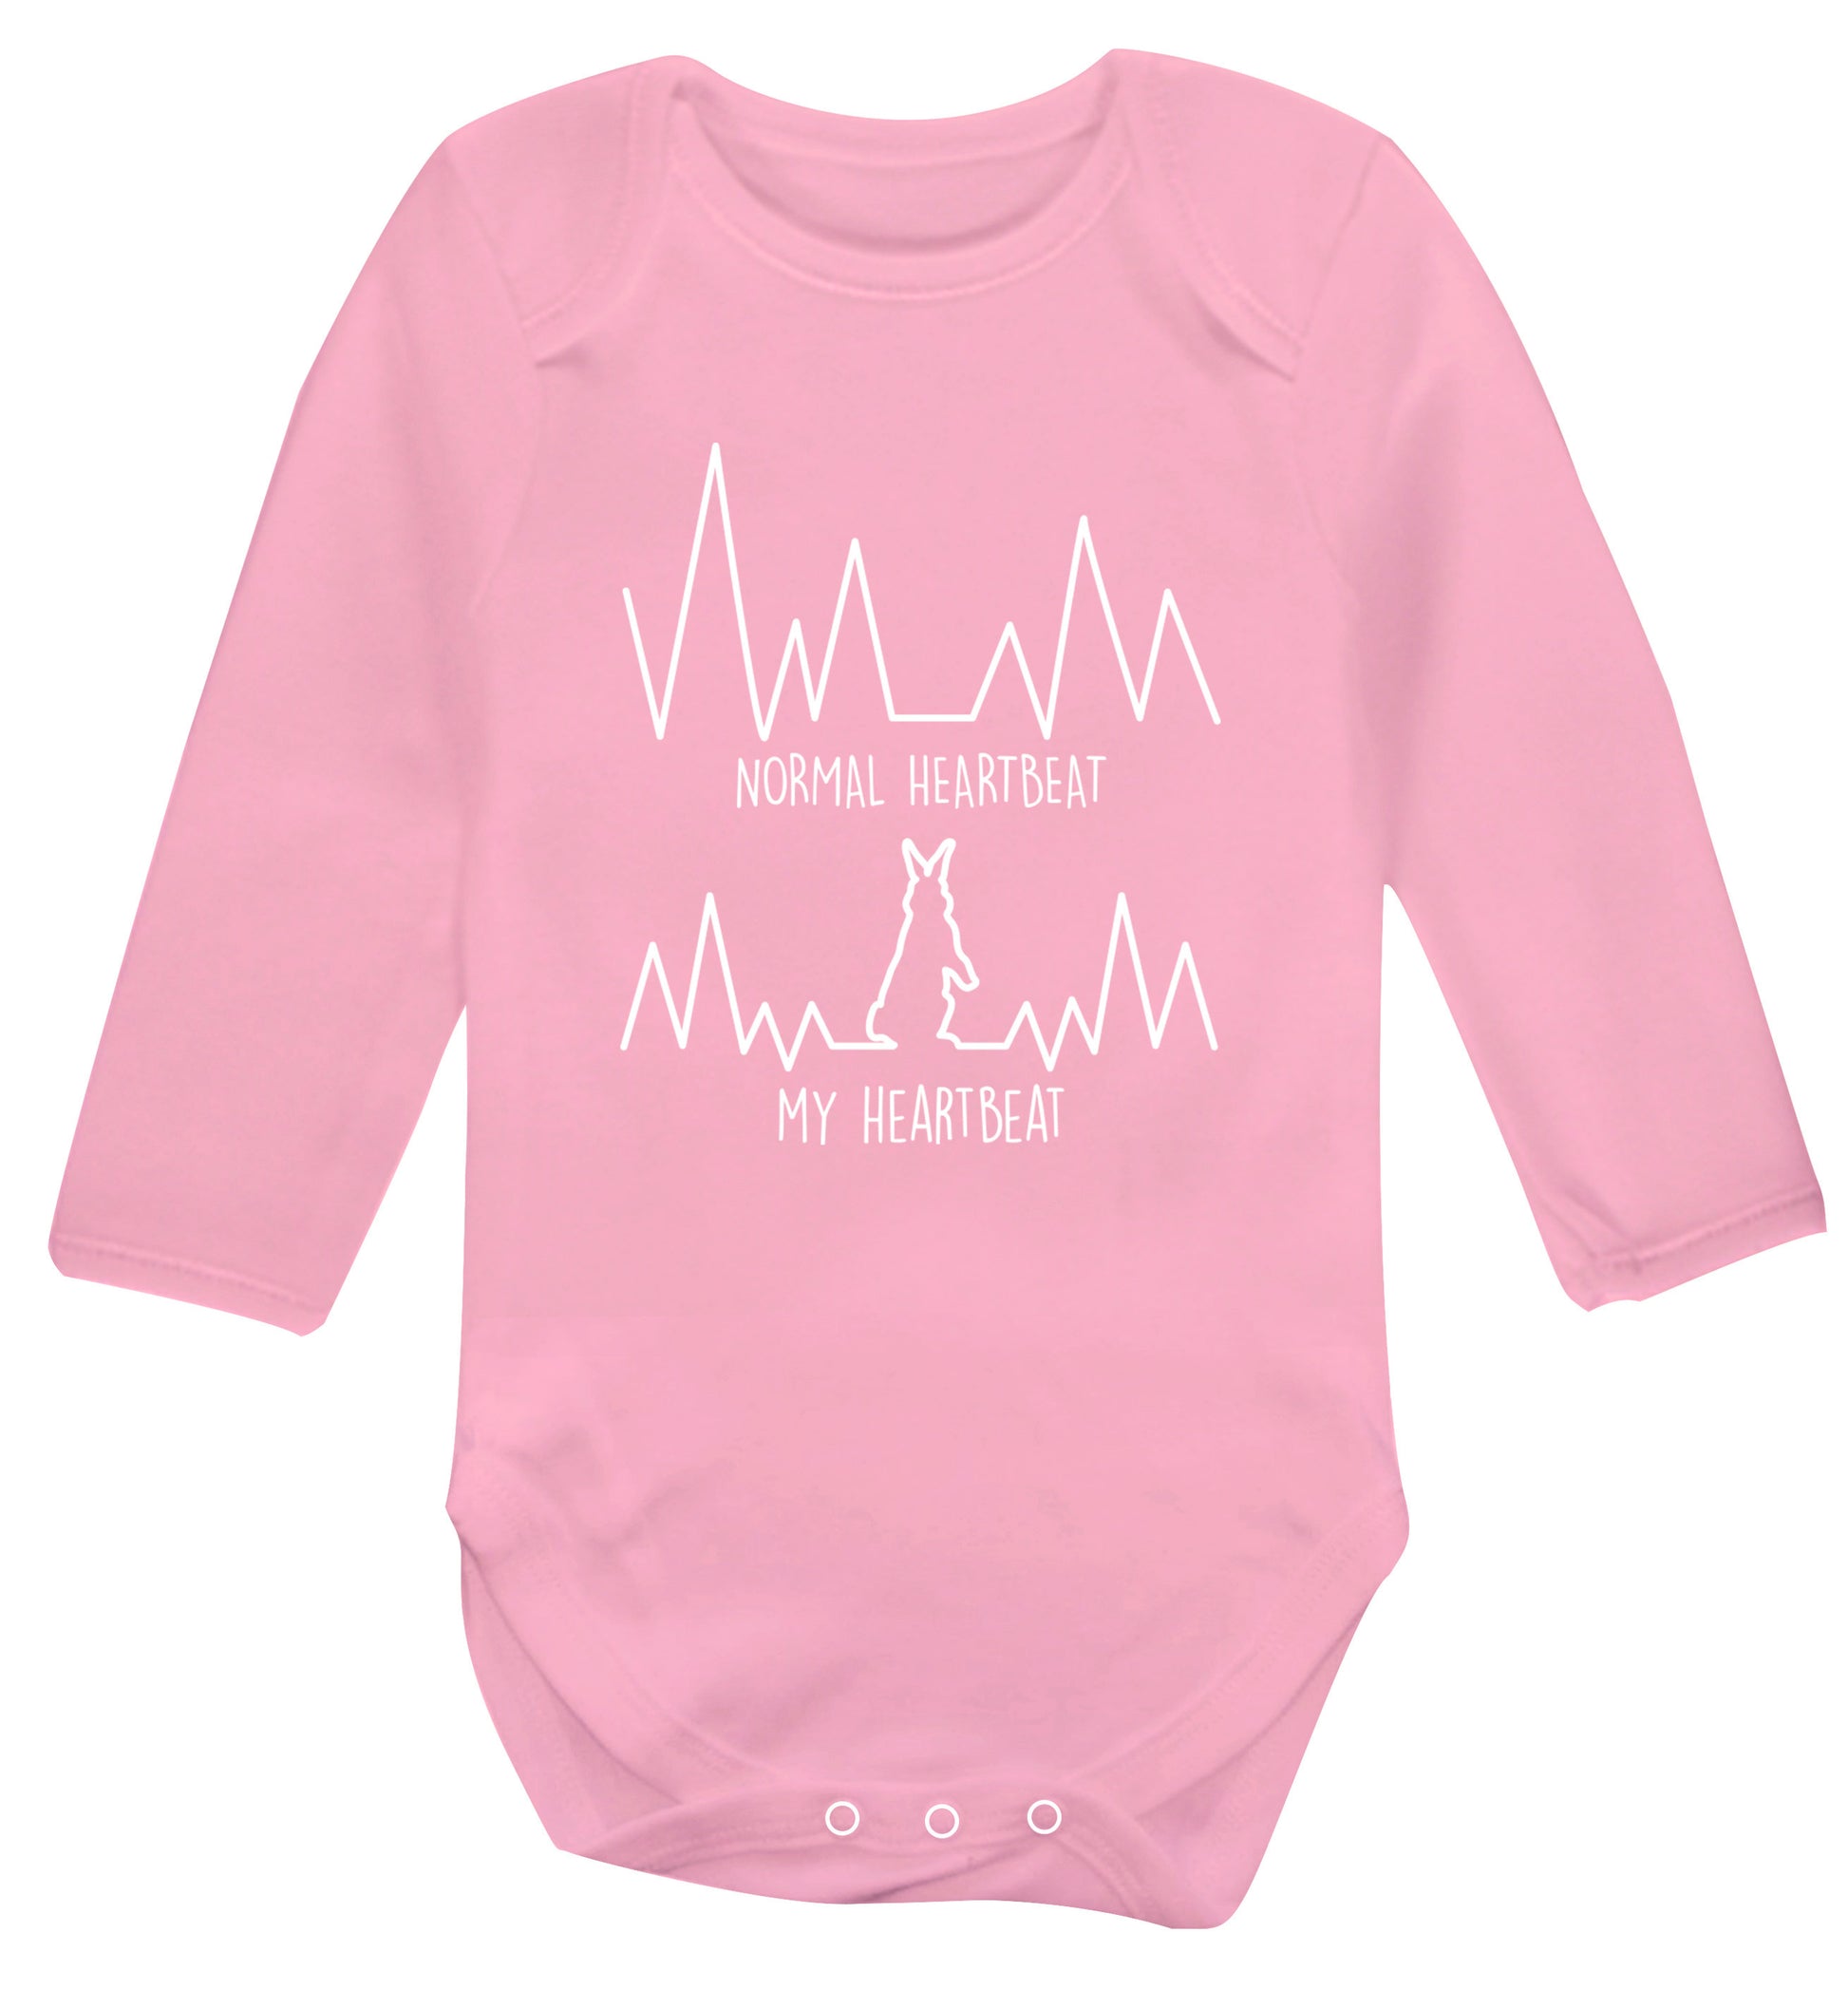 Normal heartbeat, my heartbeat rabbit lover Baby Vest long sleeved pale pink 6-12 months